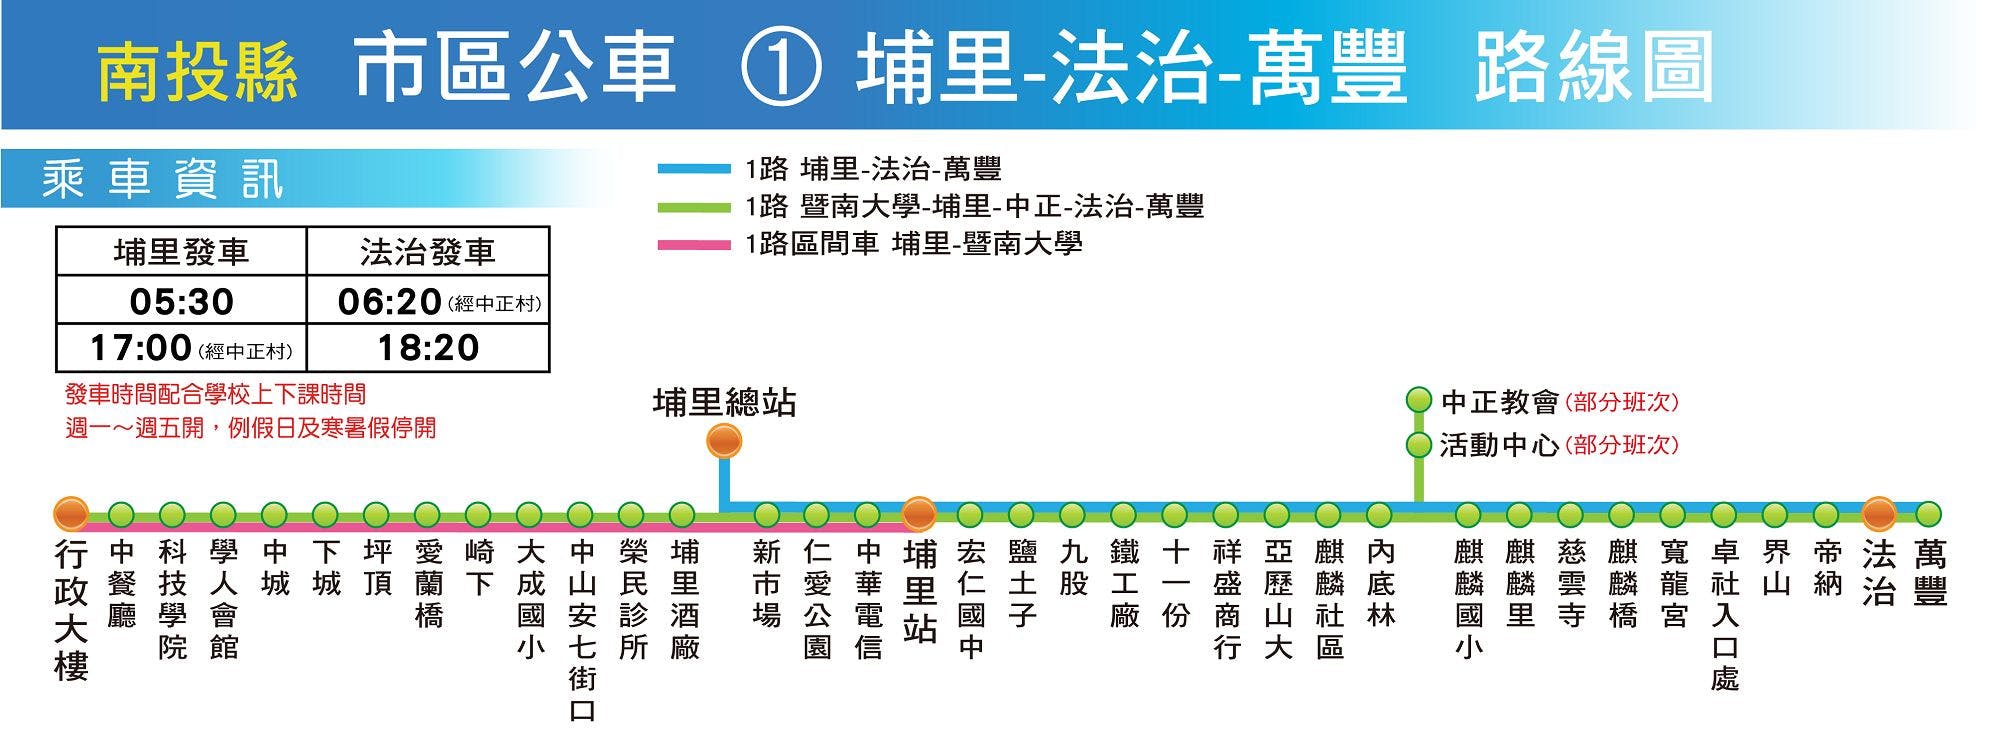 1Route Map-南投 Bus